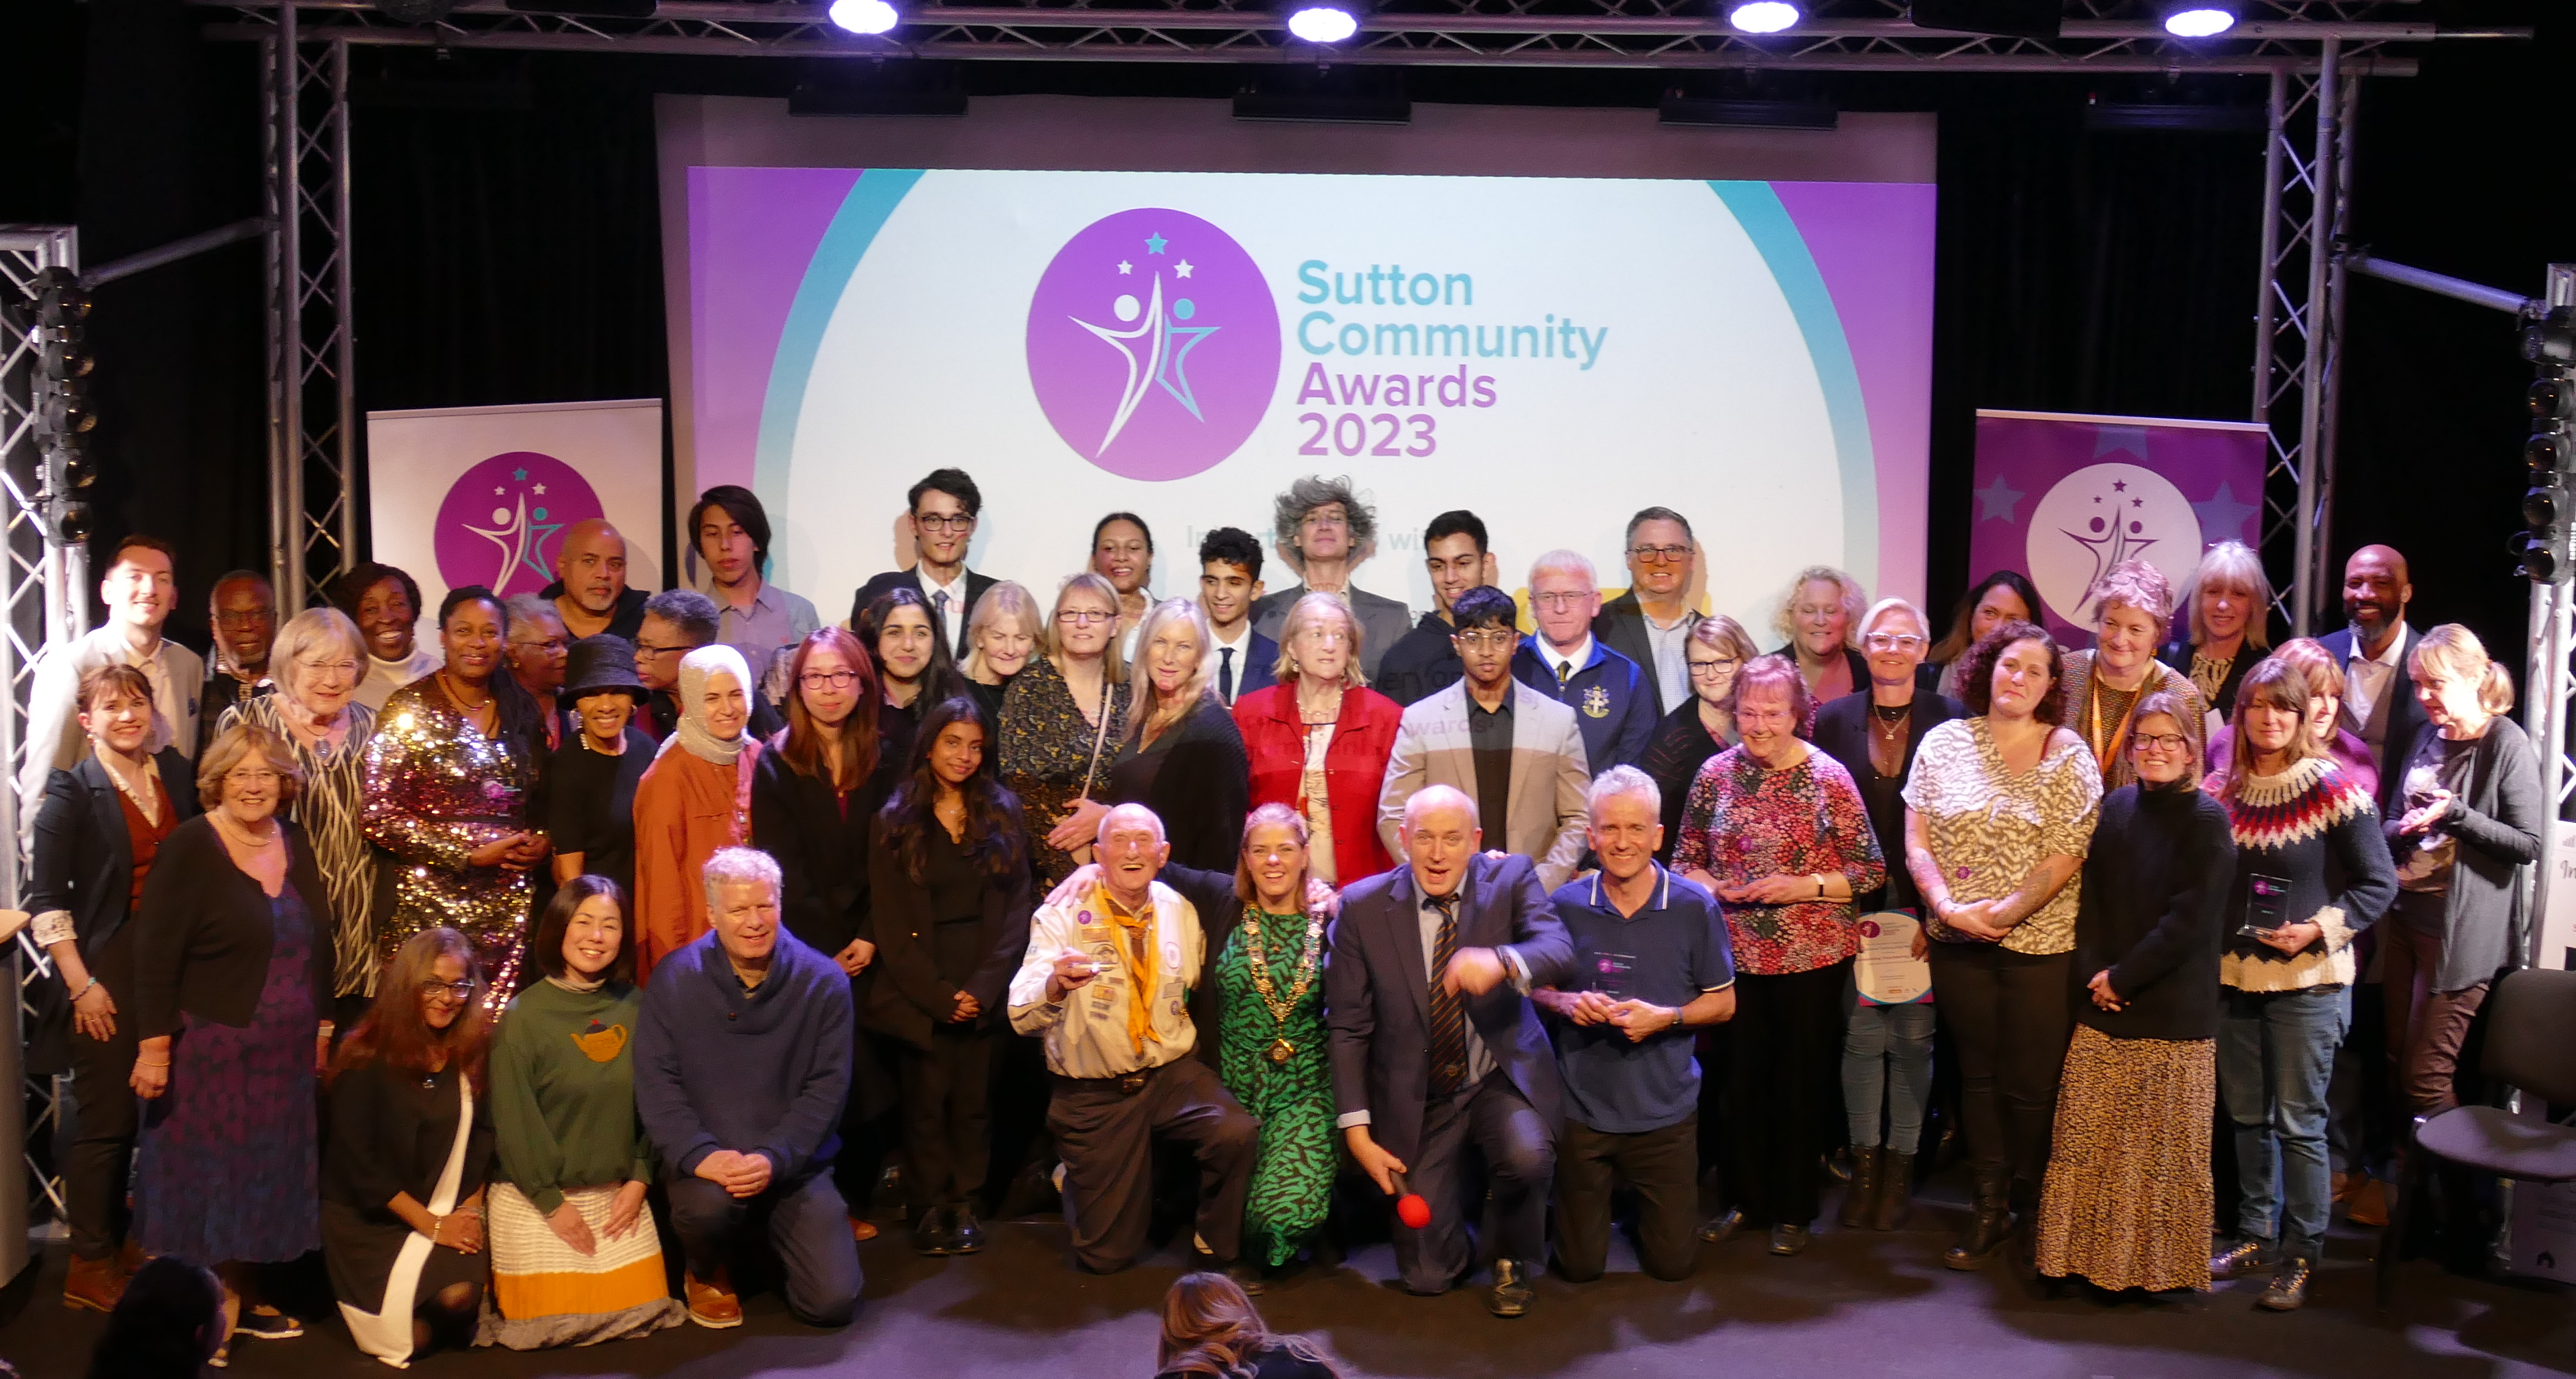 Sutton Community Award 2023 nominees on stage at the Cryer Arts, Carshalton 